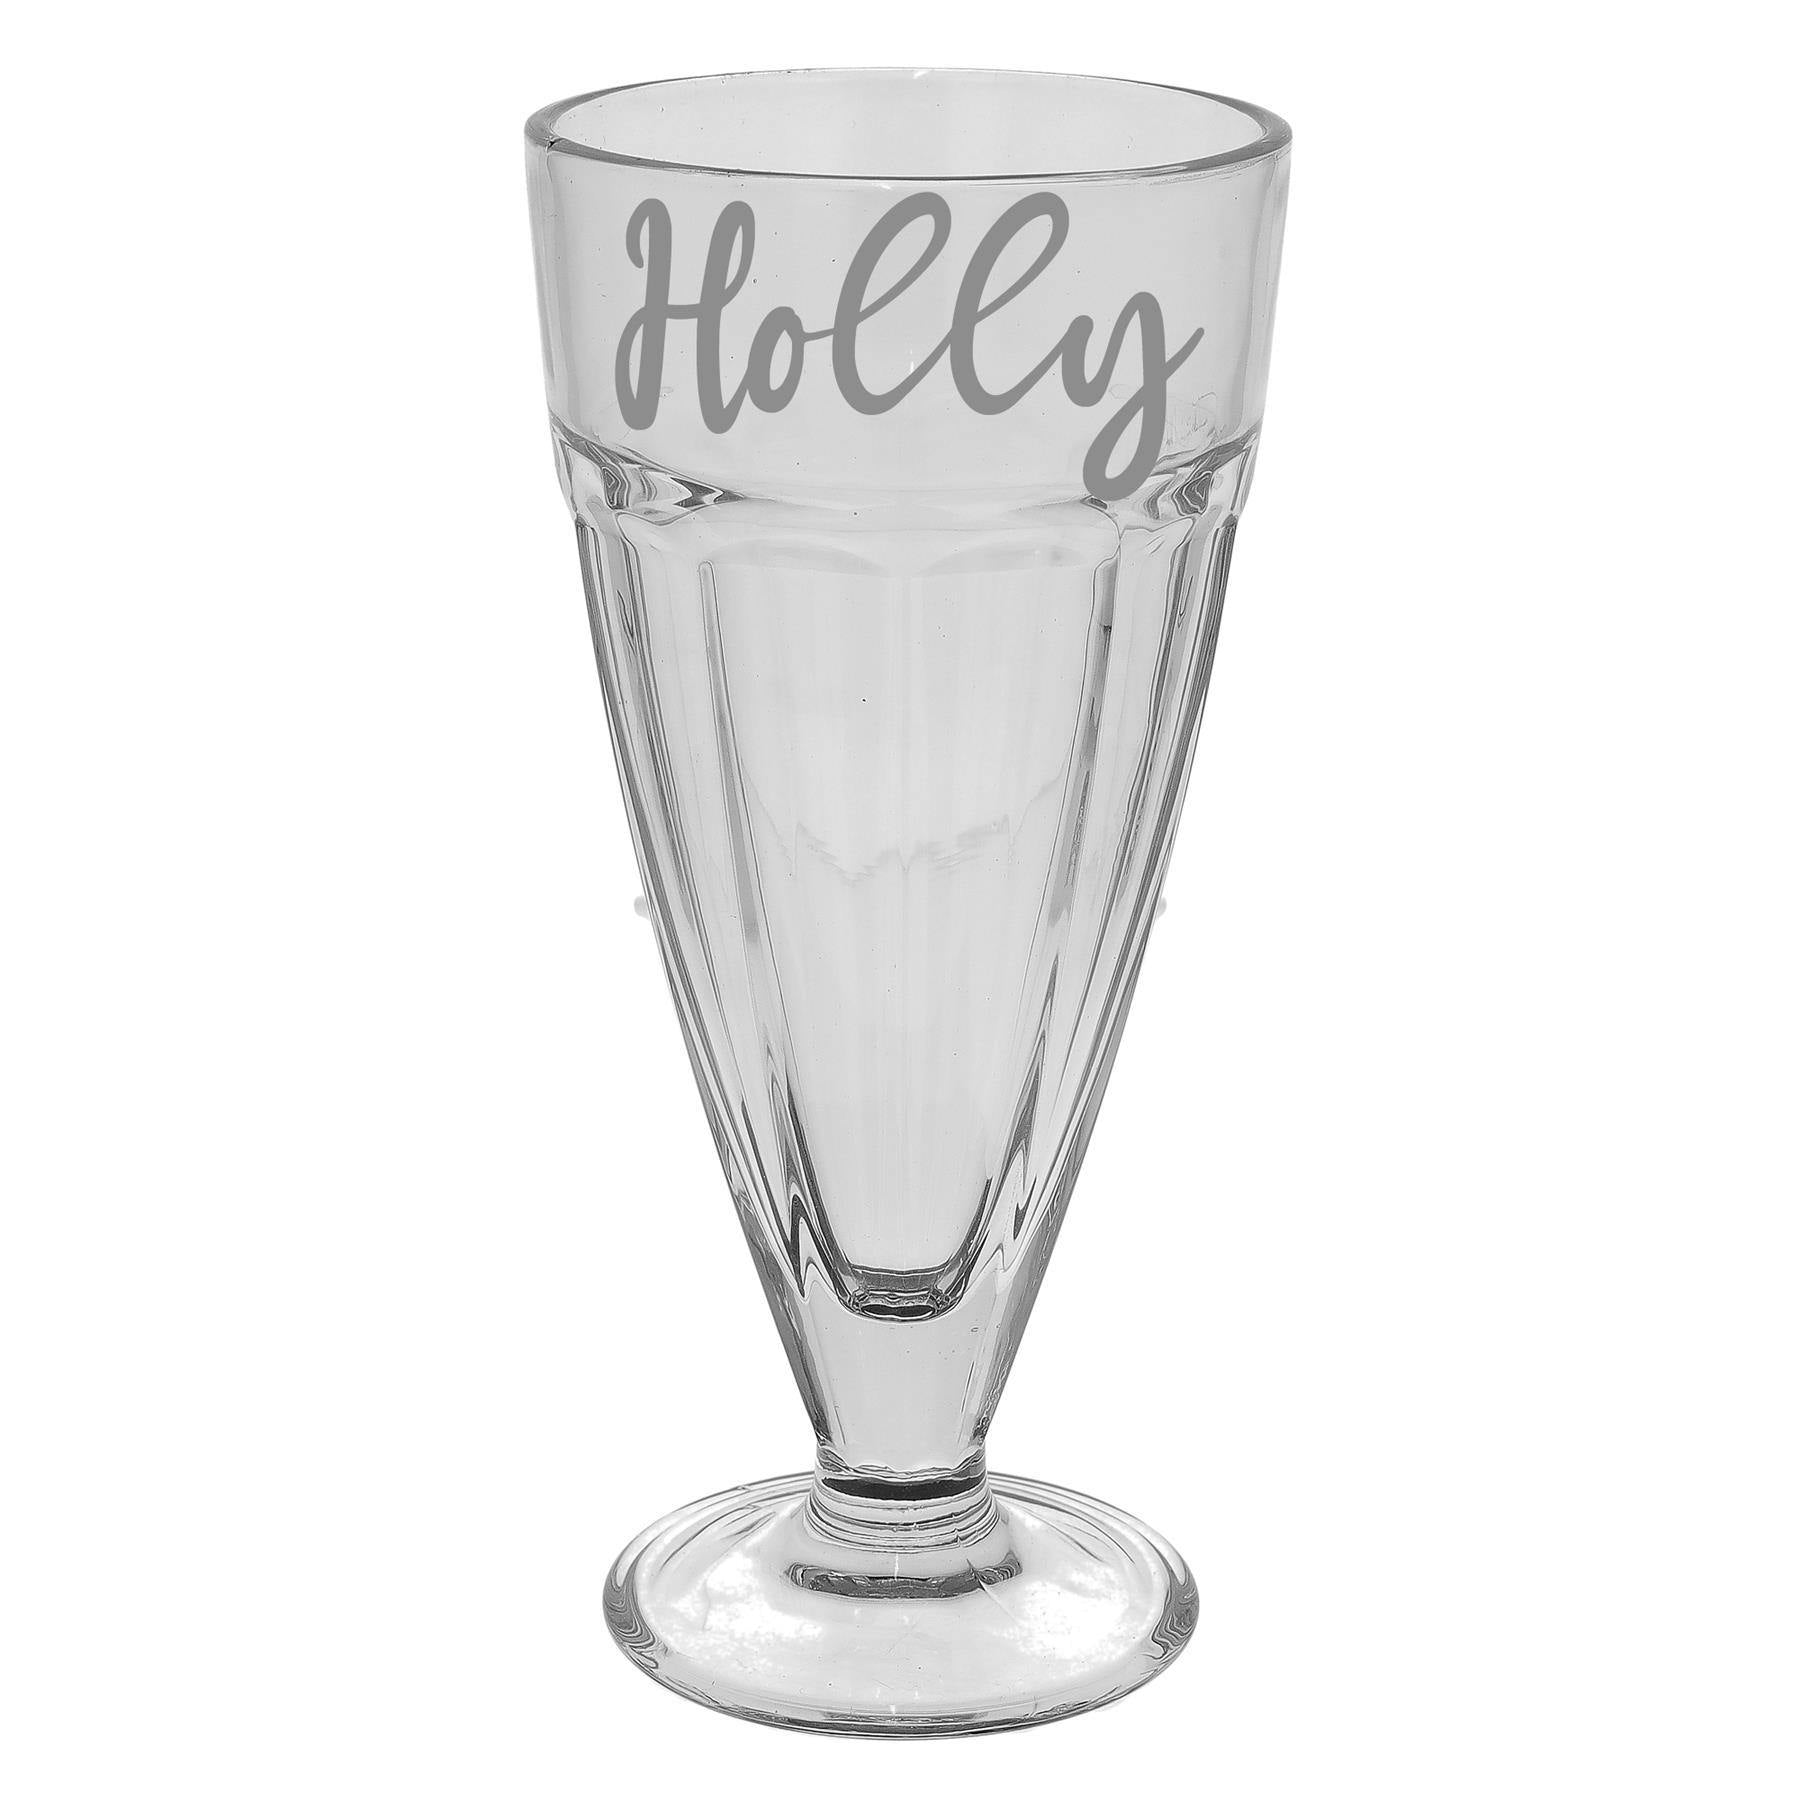 Engraved Personalised Ice Cream Sundae Glass Filled with Goodies Gift  - Always Looking Good - Empty  